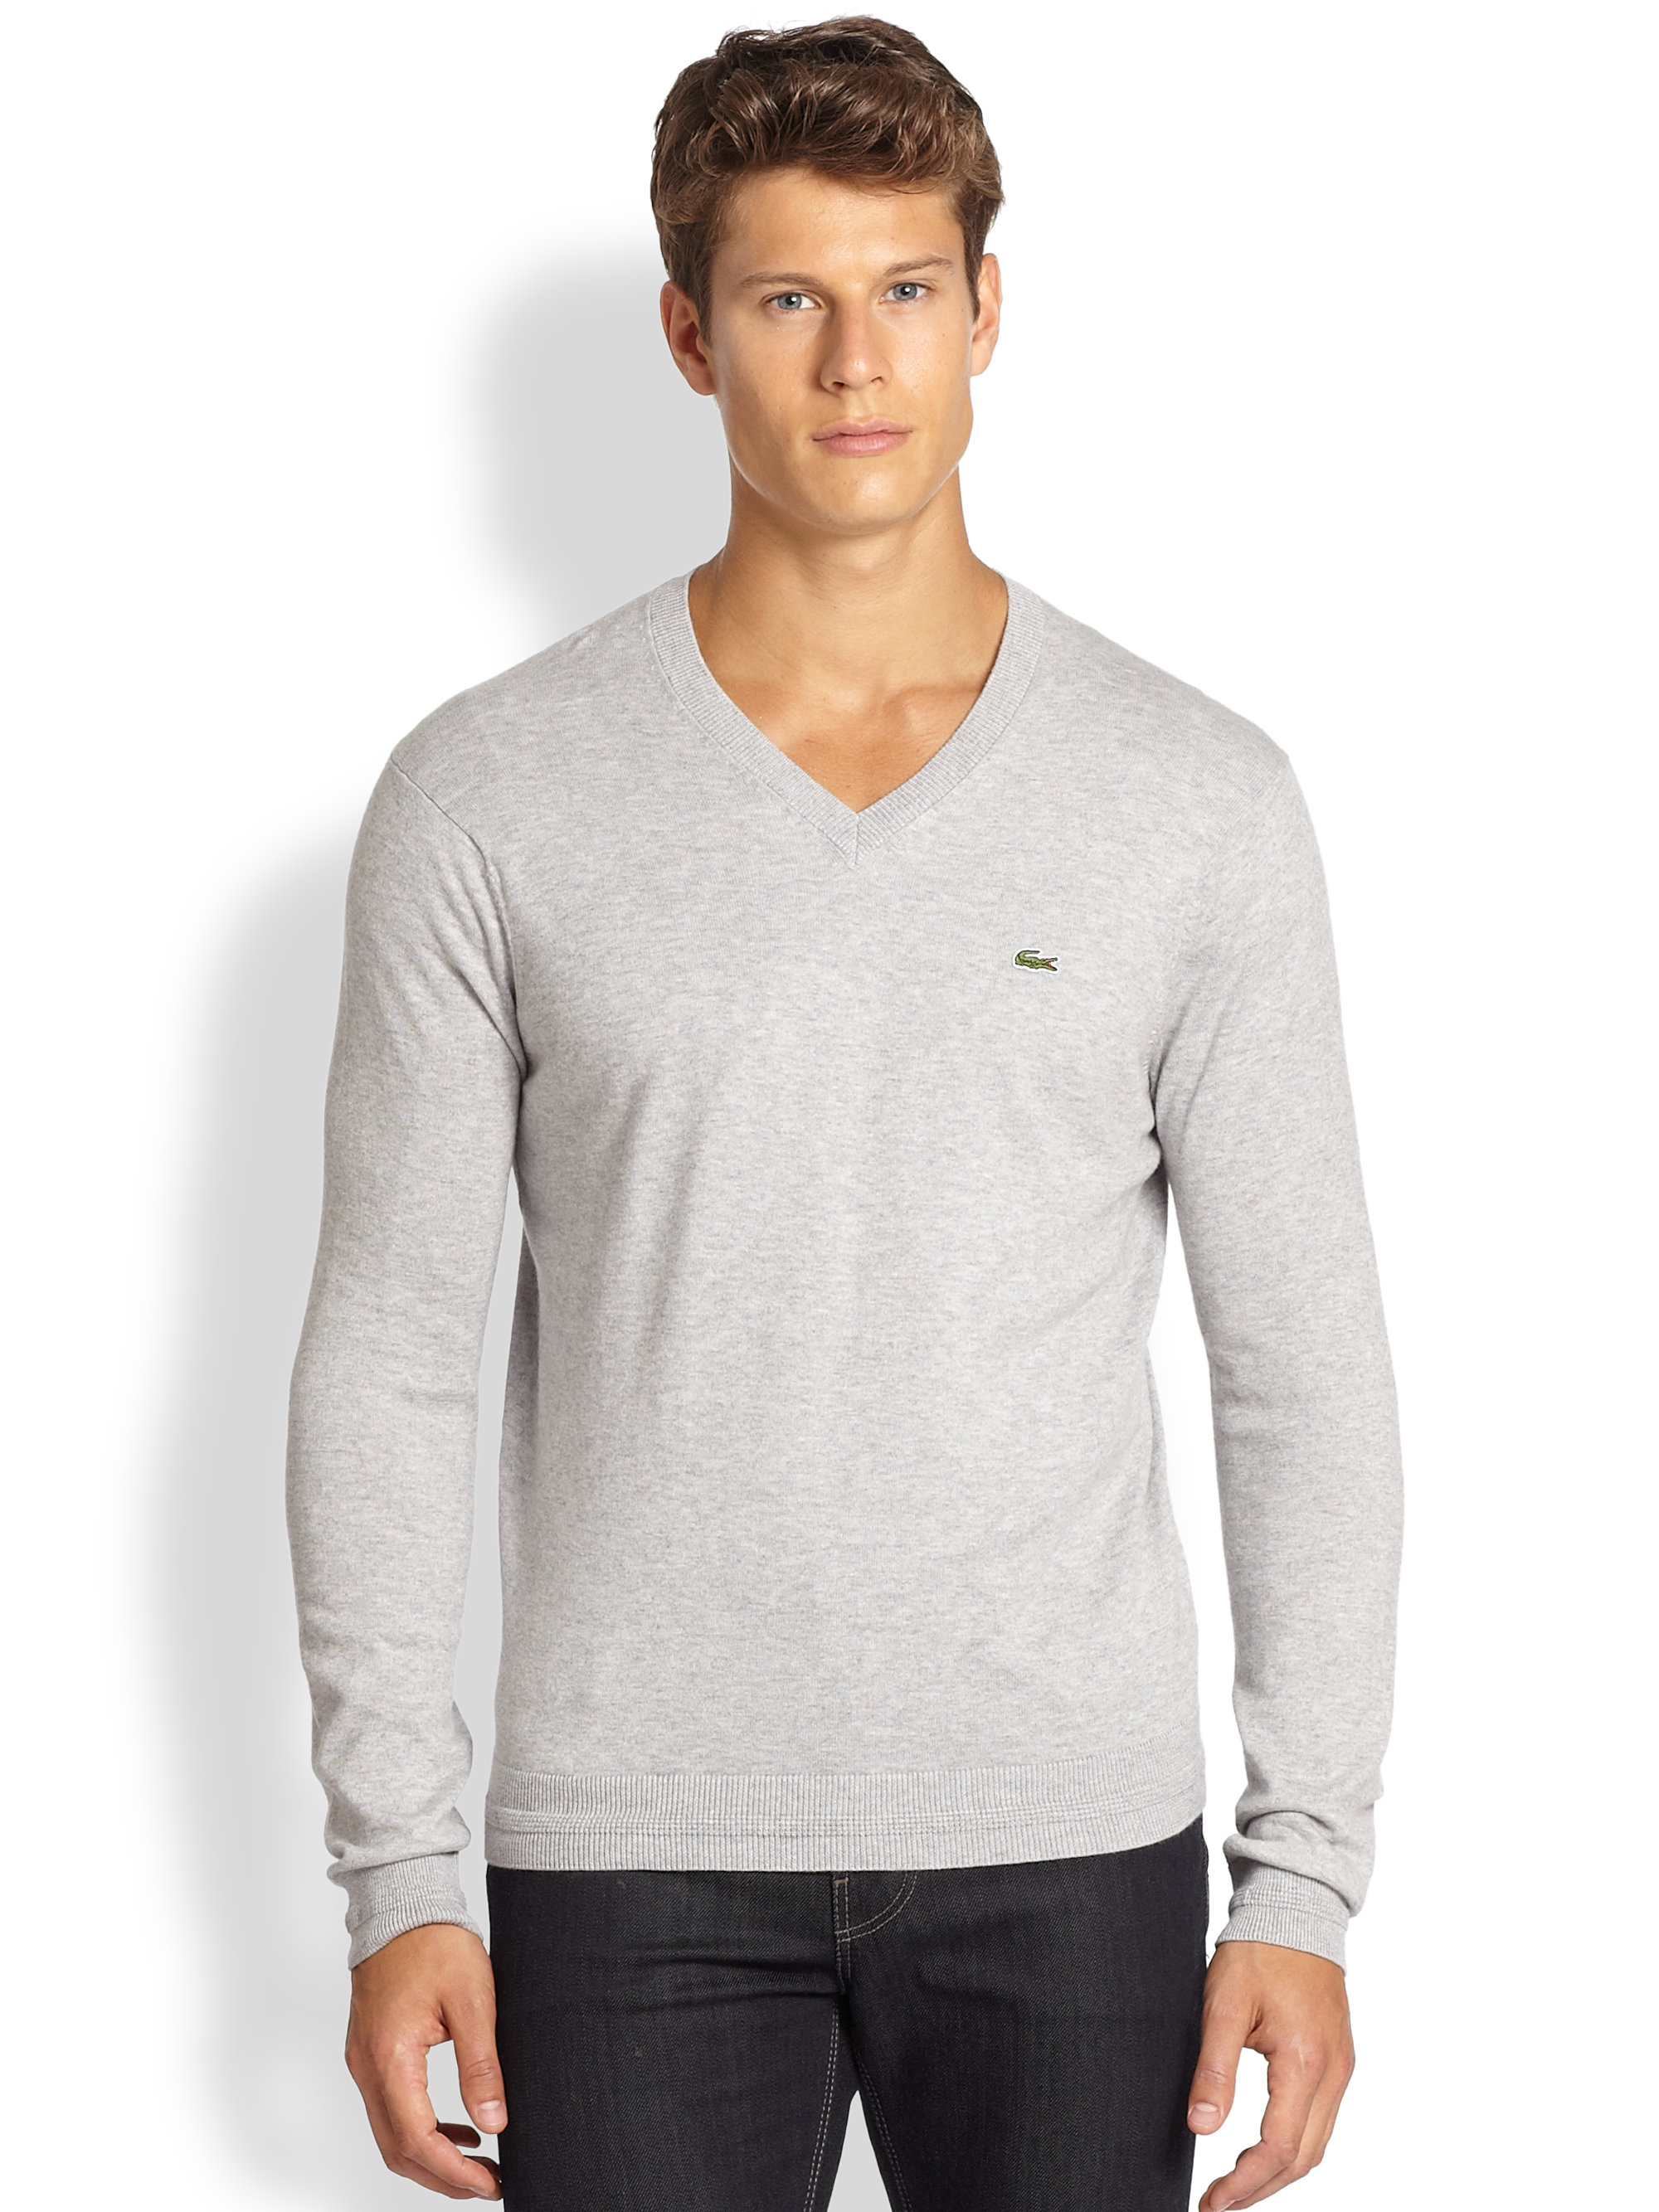 Lacoste Vneck Sweater in Charcoal Grey (Gray) for Men - Lyst